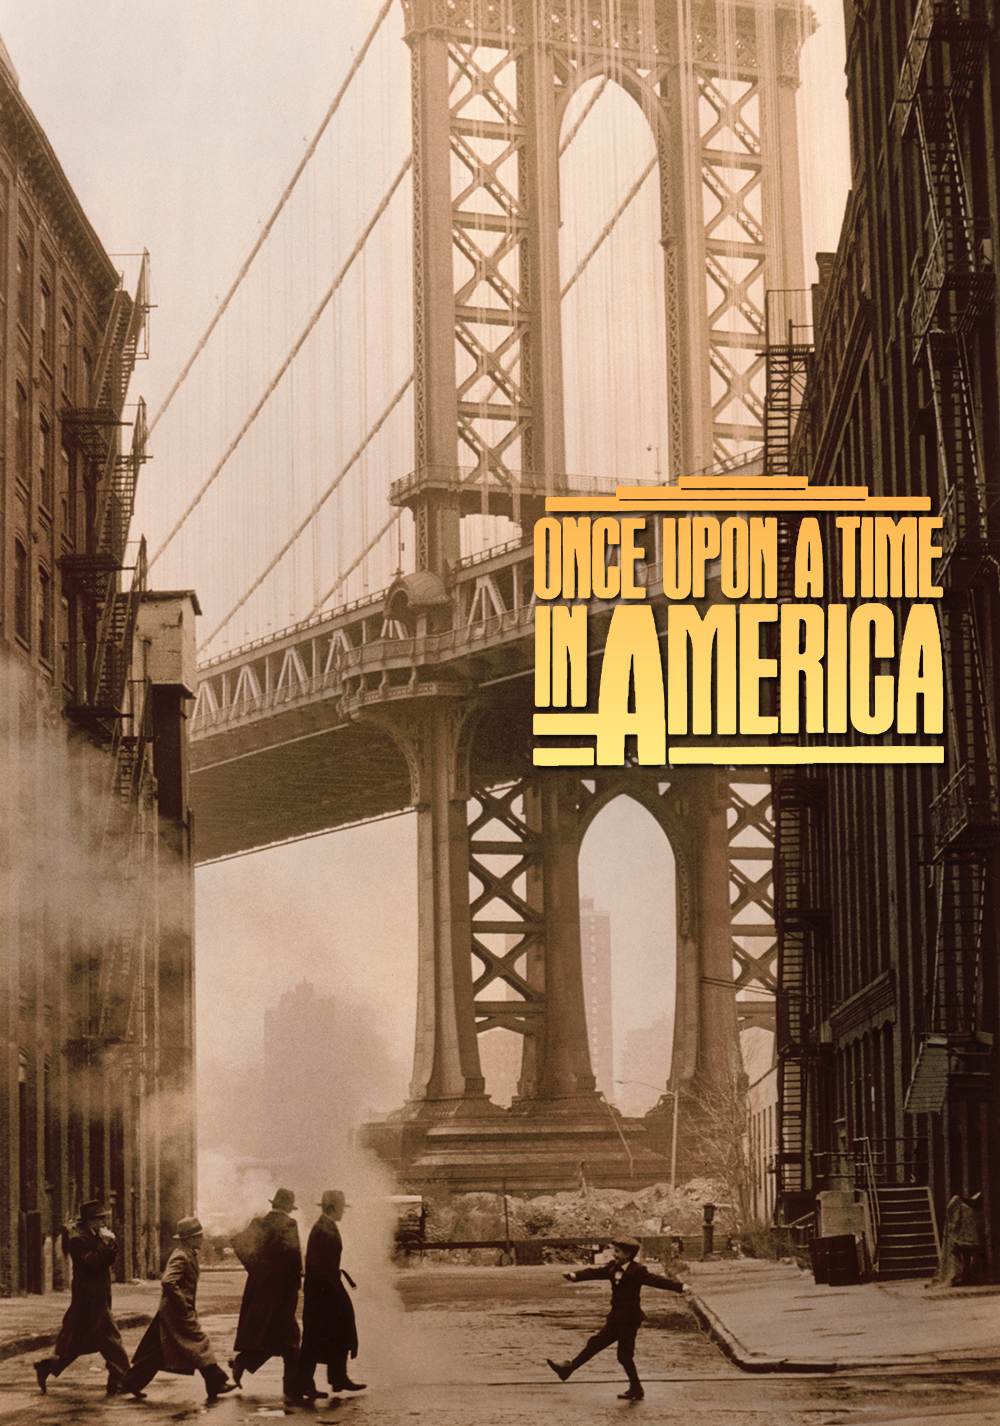 Once Upon A Time In America Wallpaper Image Group 27